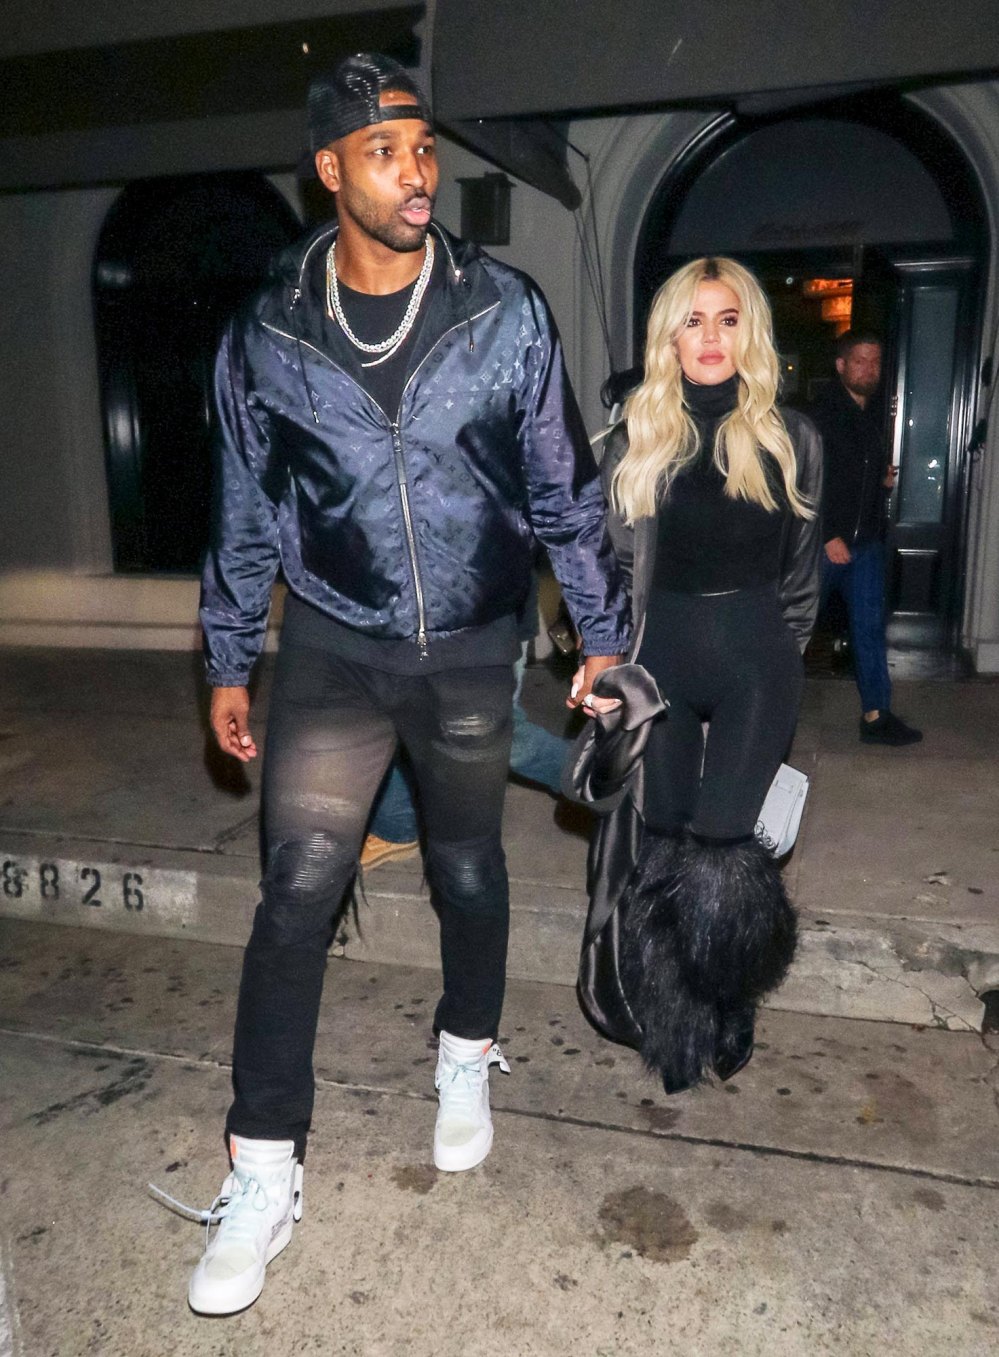 Khloe-Kardashian-and-Scott-Disick-Joke-About-Going-on-a-Date-After-Tristan-Thompson-Split---You-Get-the-Practice-- -232